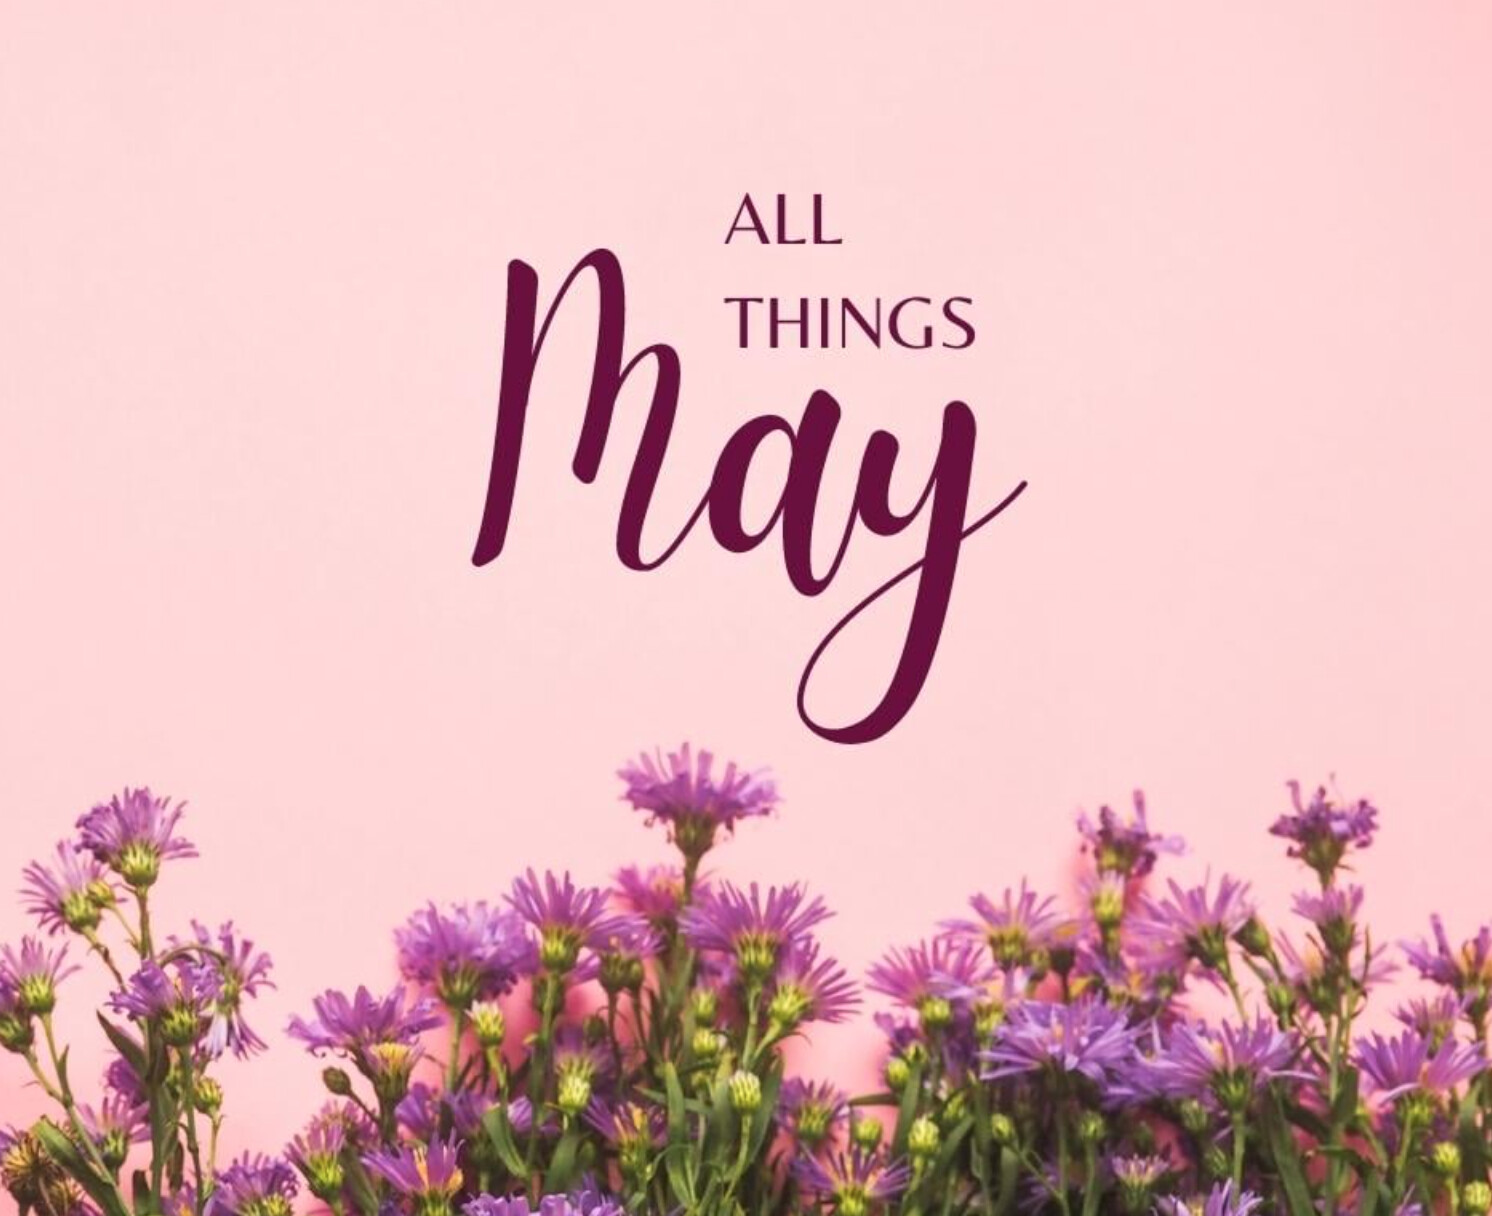 THE MERRY MONTH OF MAY IS UPON US!